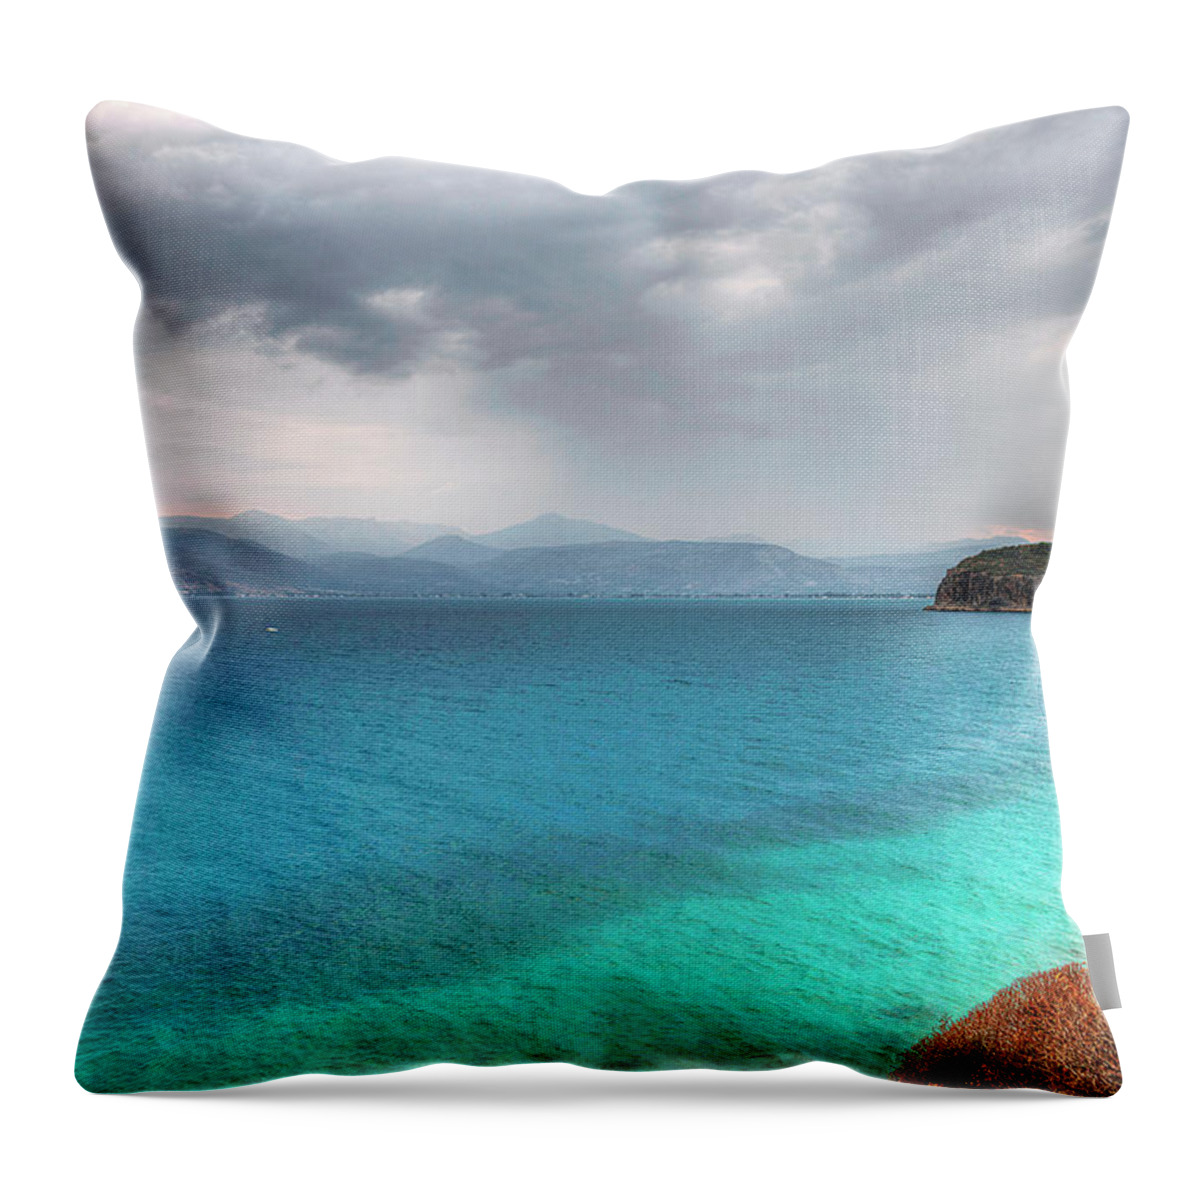 Tranquility Throw Pillow featuring the photograph The Sea On A Cloudy Summer Day by George Pachantouris